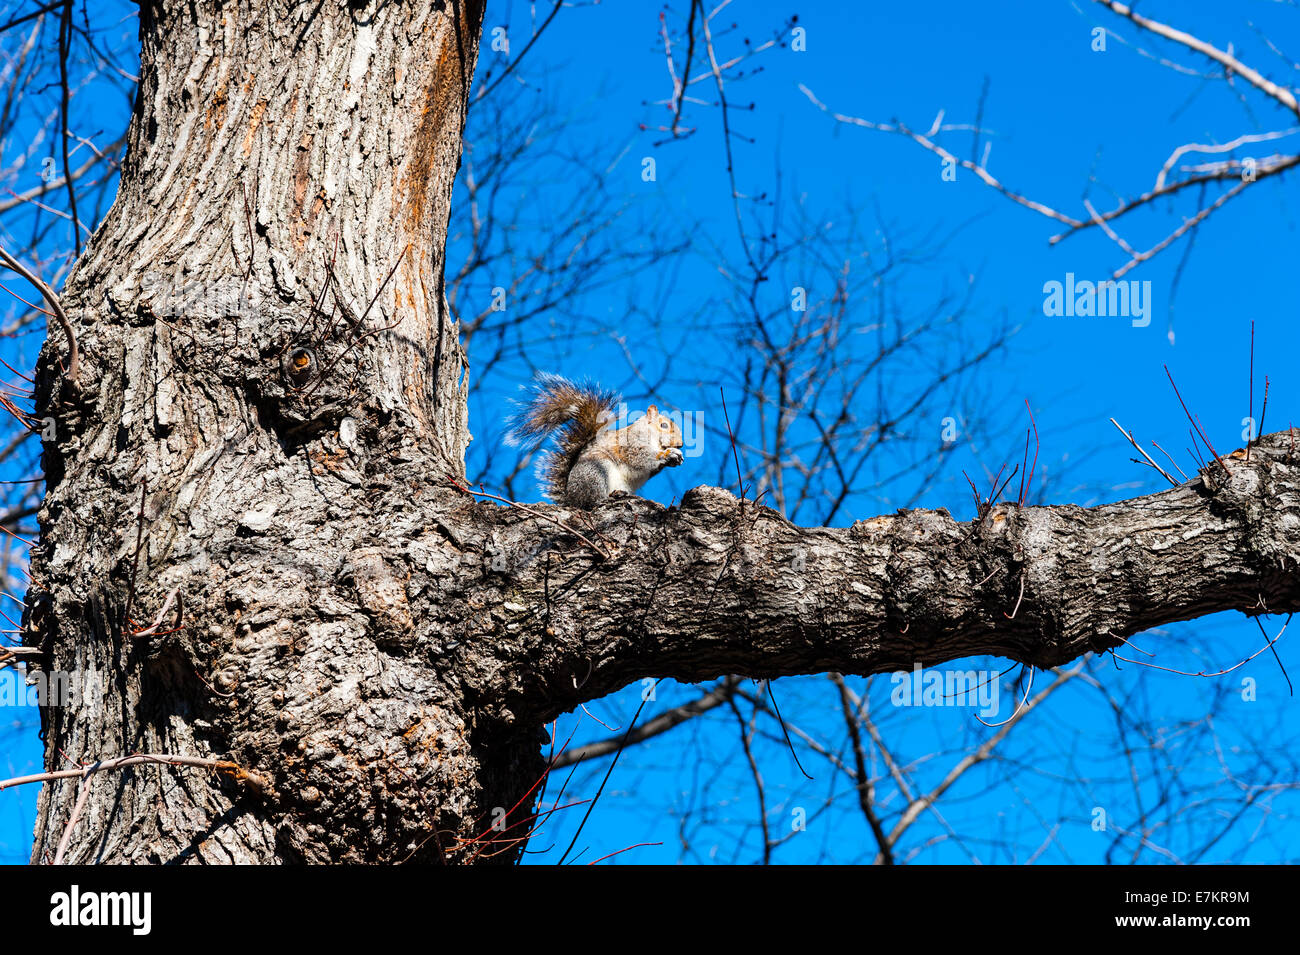 US, New York City, Central Park. Eastern gray squirrel. Stock Photo